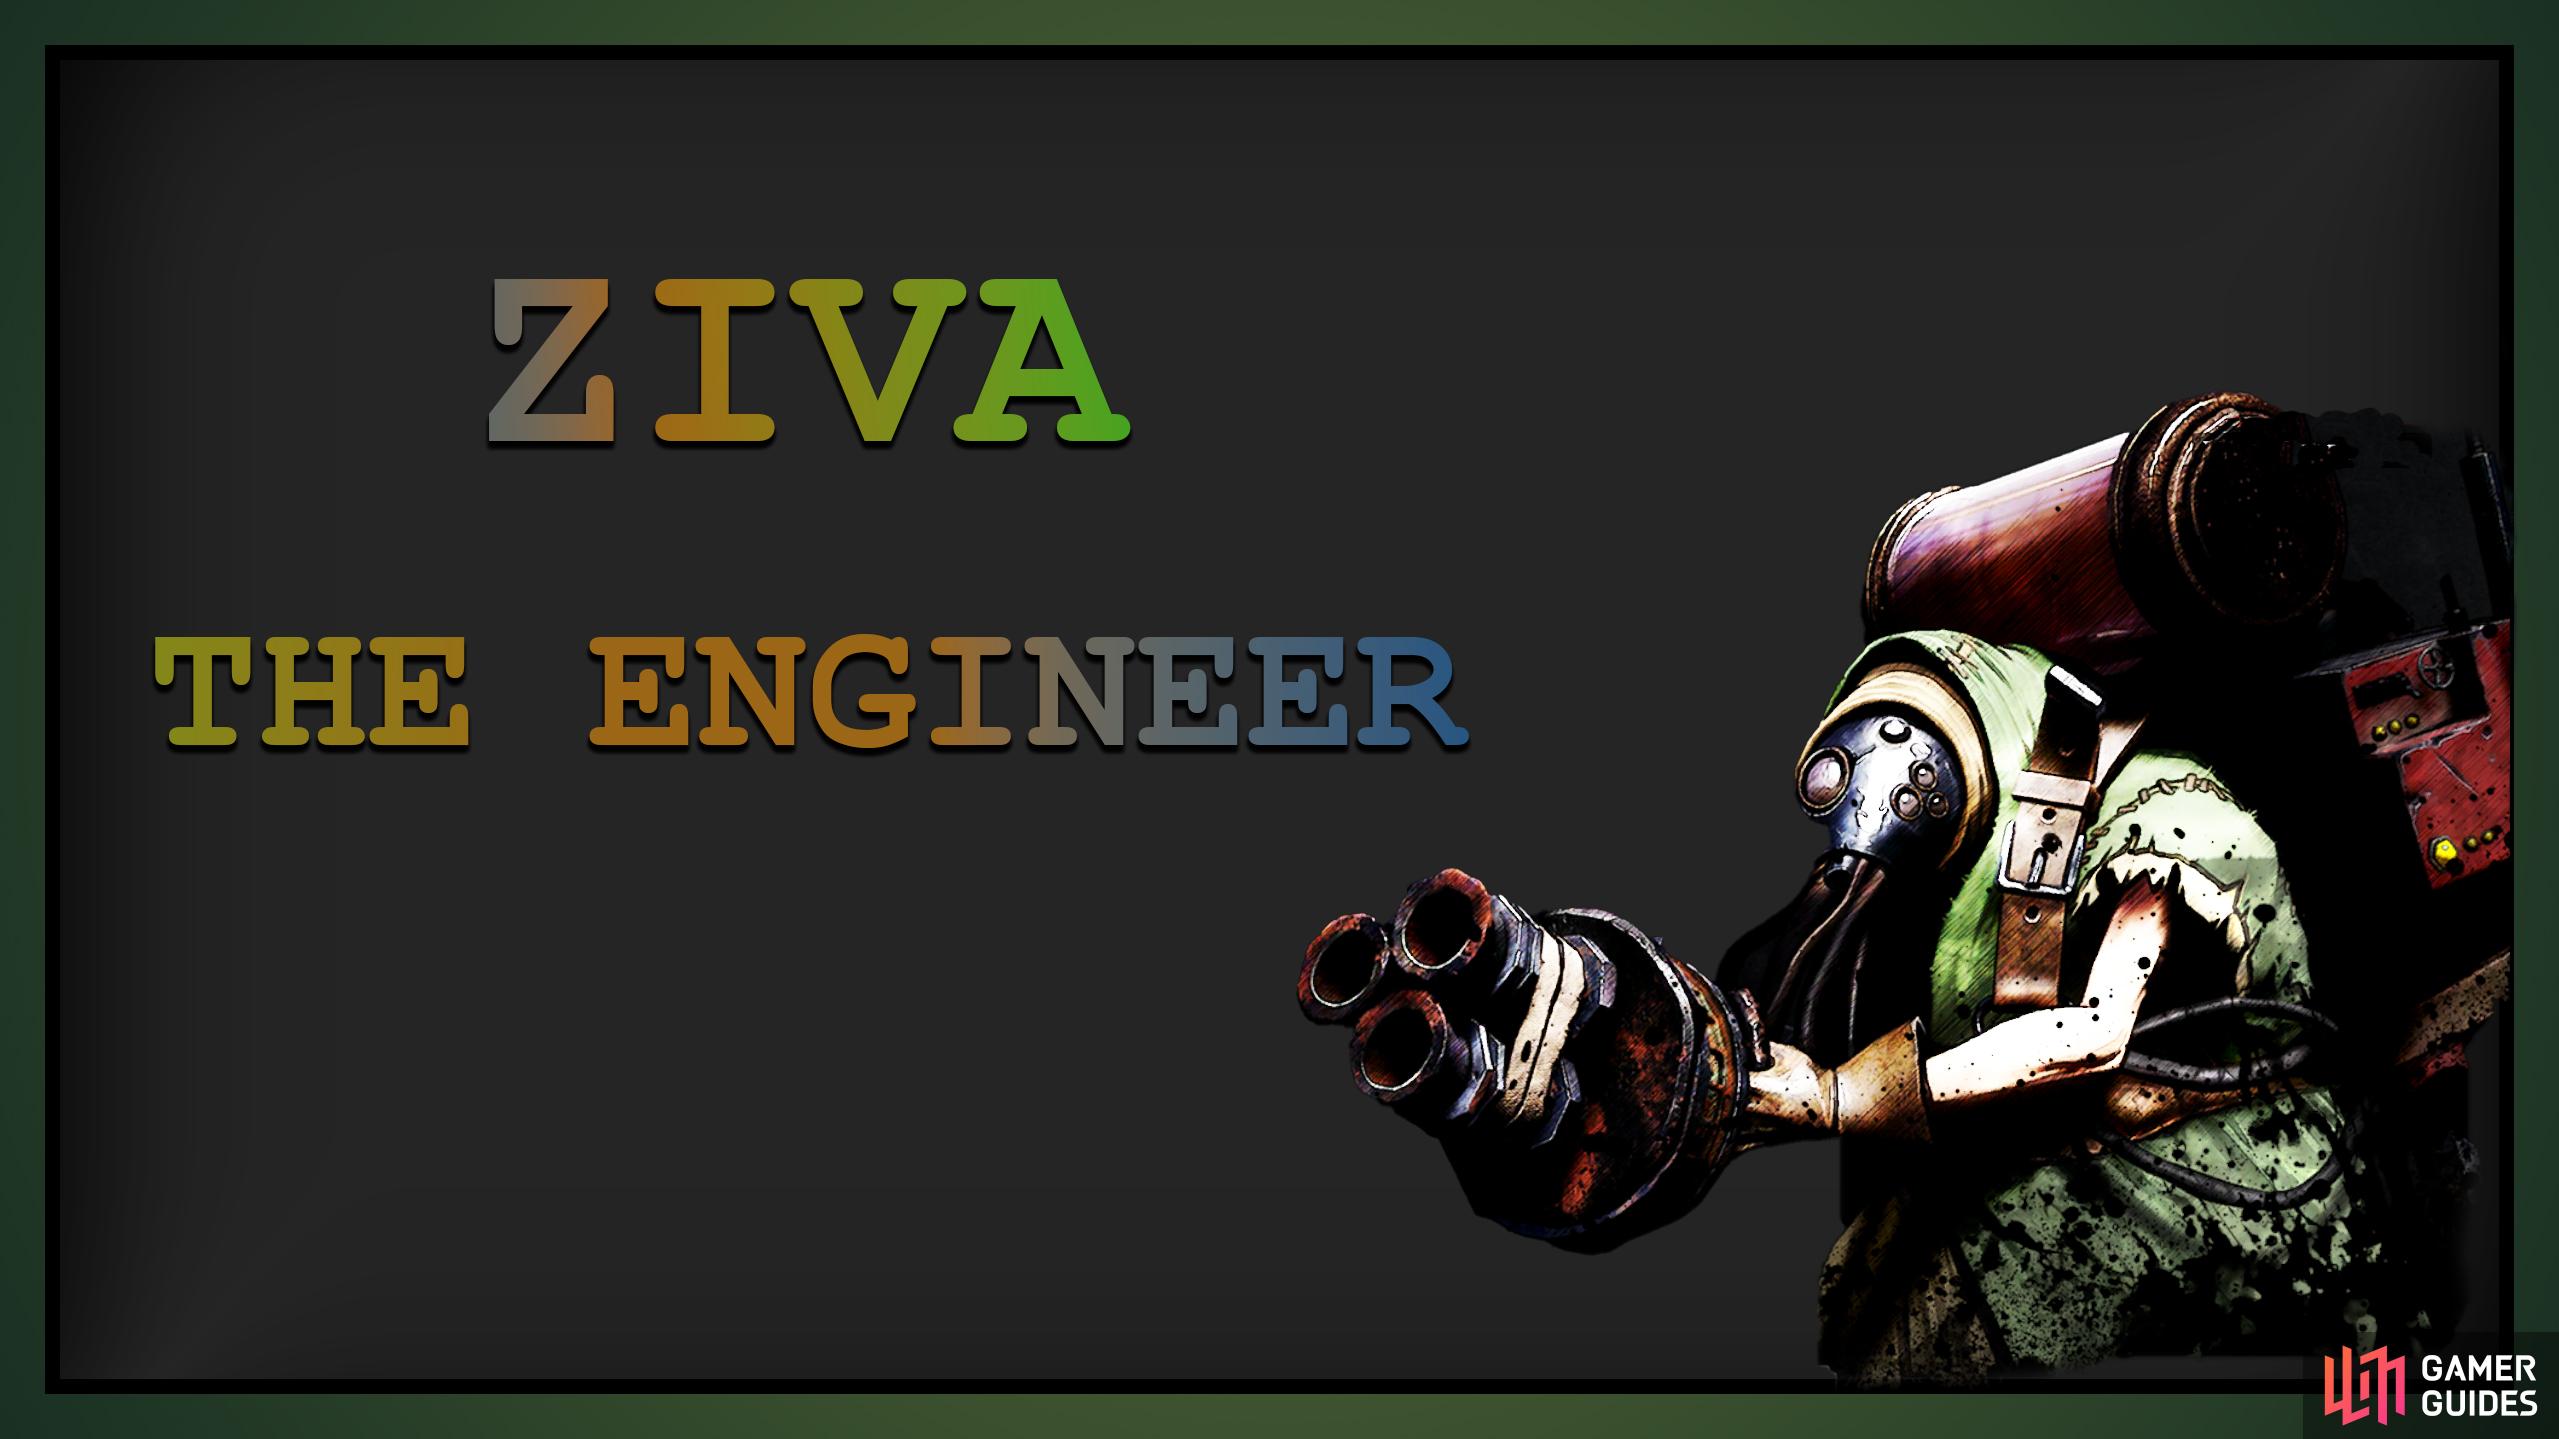 Ziva the Engineer is one of the first bosses in Act 3 of V Rising.